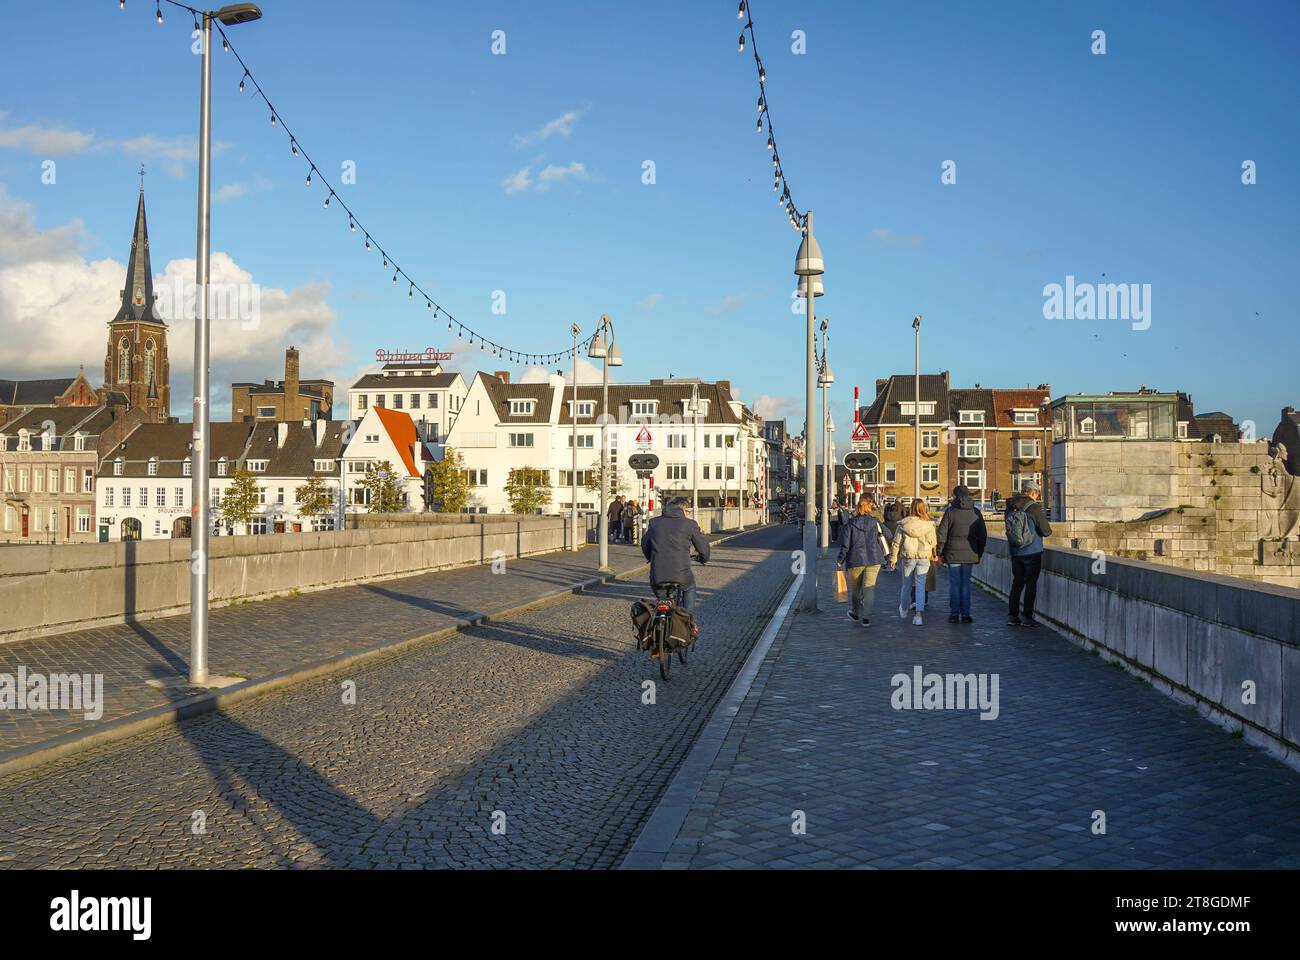 Pedestrians and cyclers crossing the Sint Servaasbrug, St. Servatius Bridge, across the river Meuse in Maastricht, Limburg, Netherlands. Stock Photo